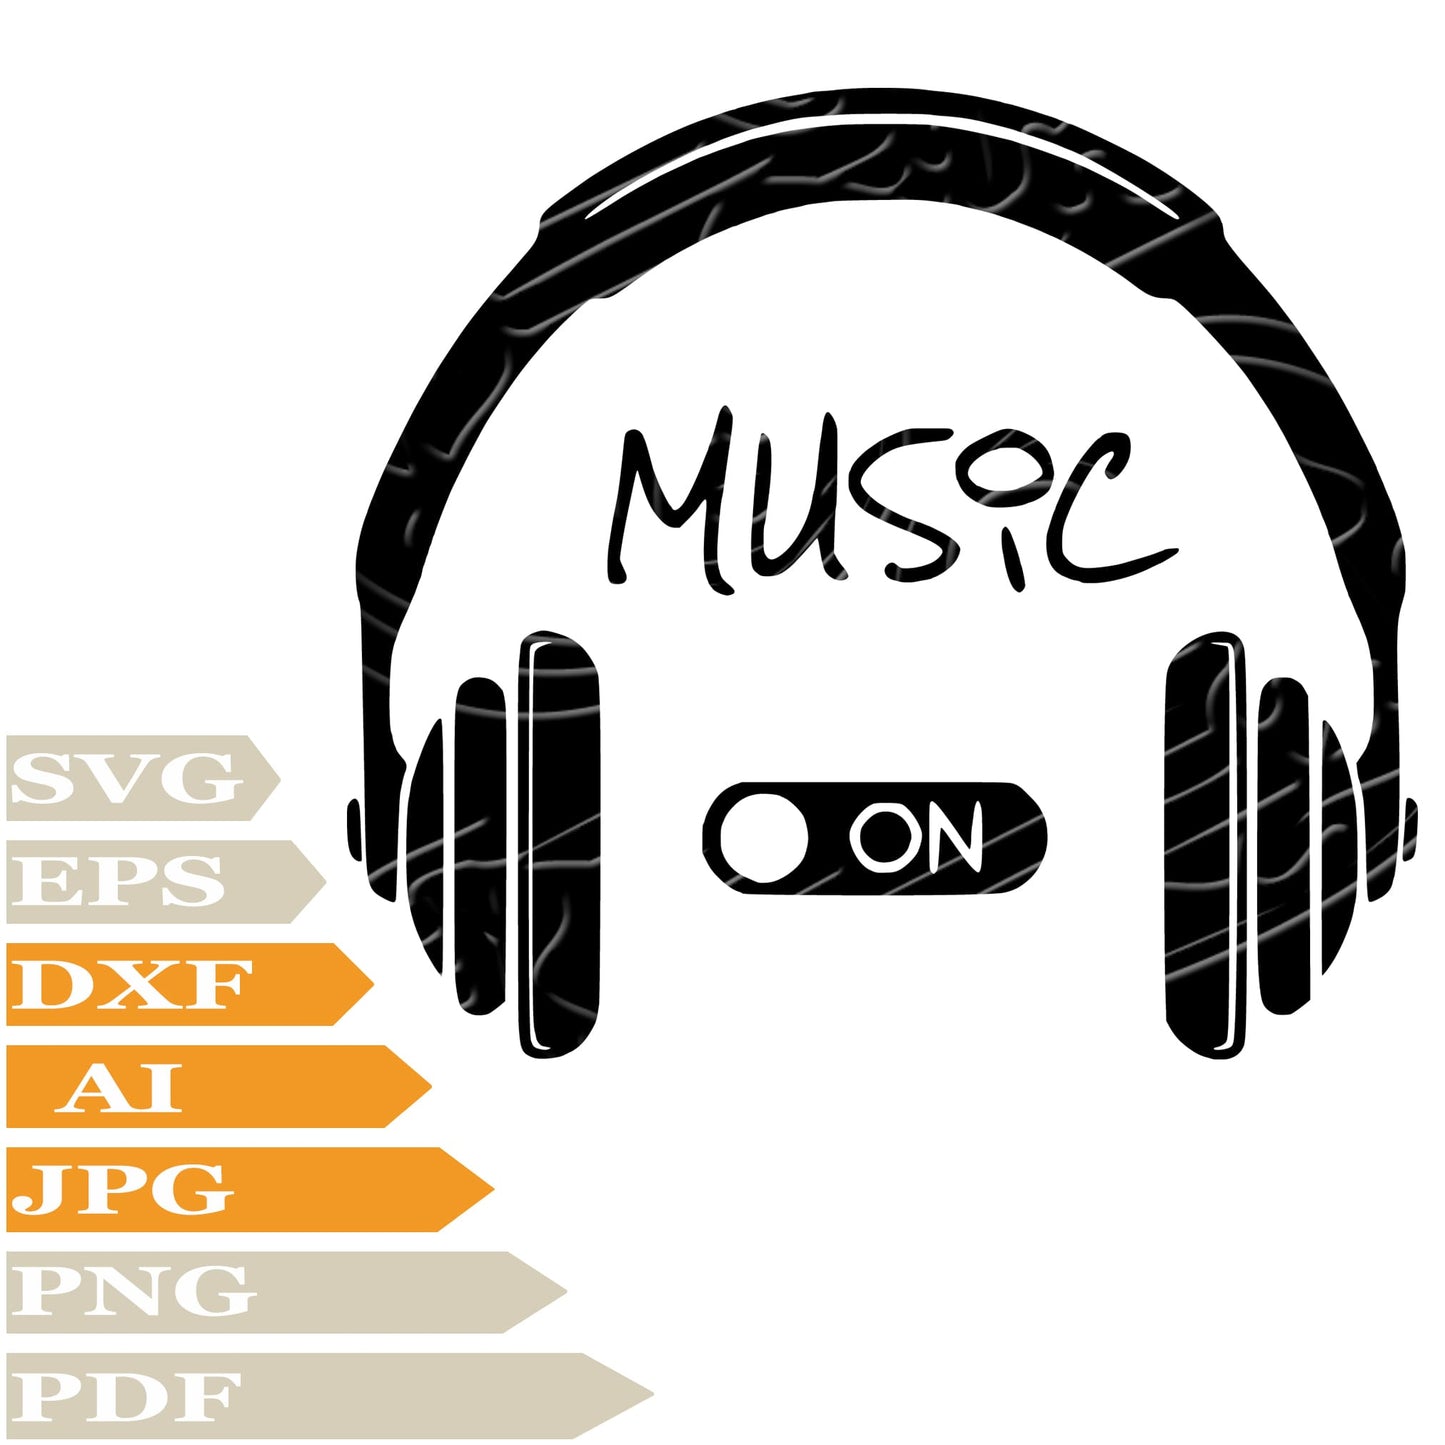 Headphones, Headphones Music ON Svg File, Image Cut, Png, For Tattoo, Silhouette, Digital Vector Download, Cut File, Clipart, For Cricut